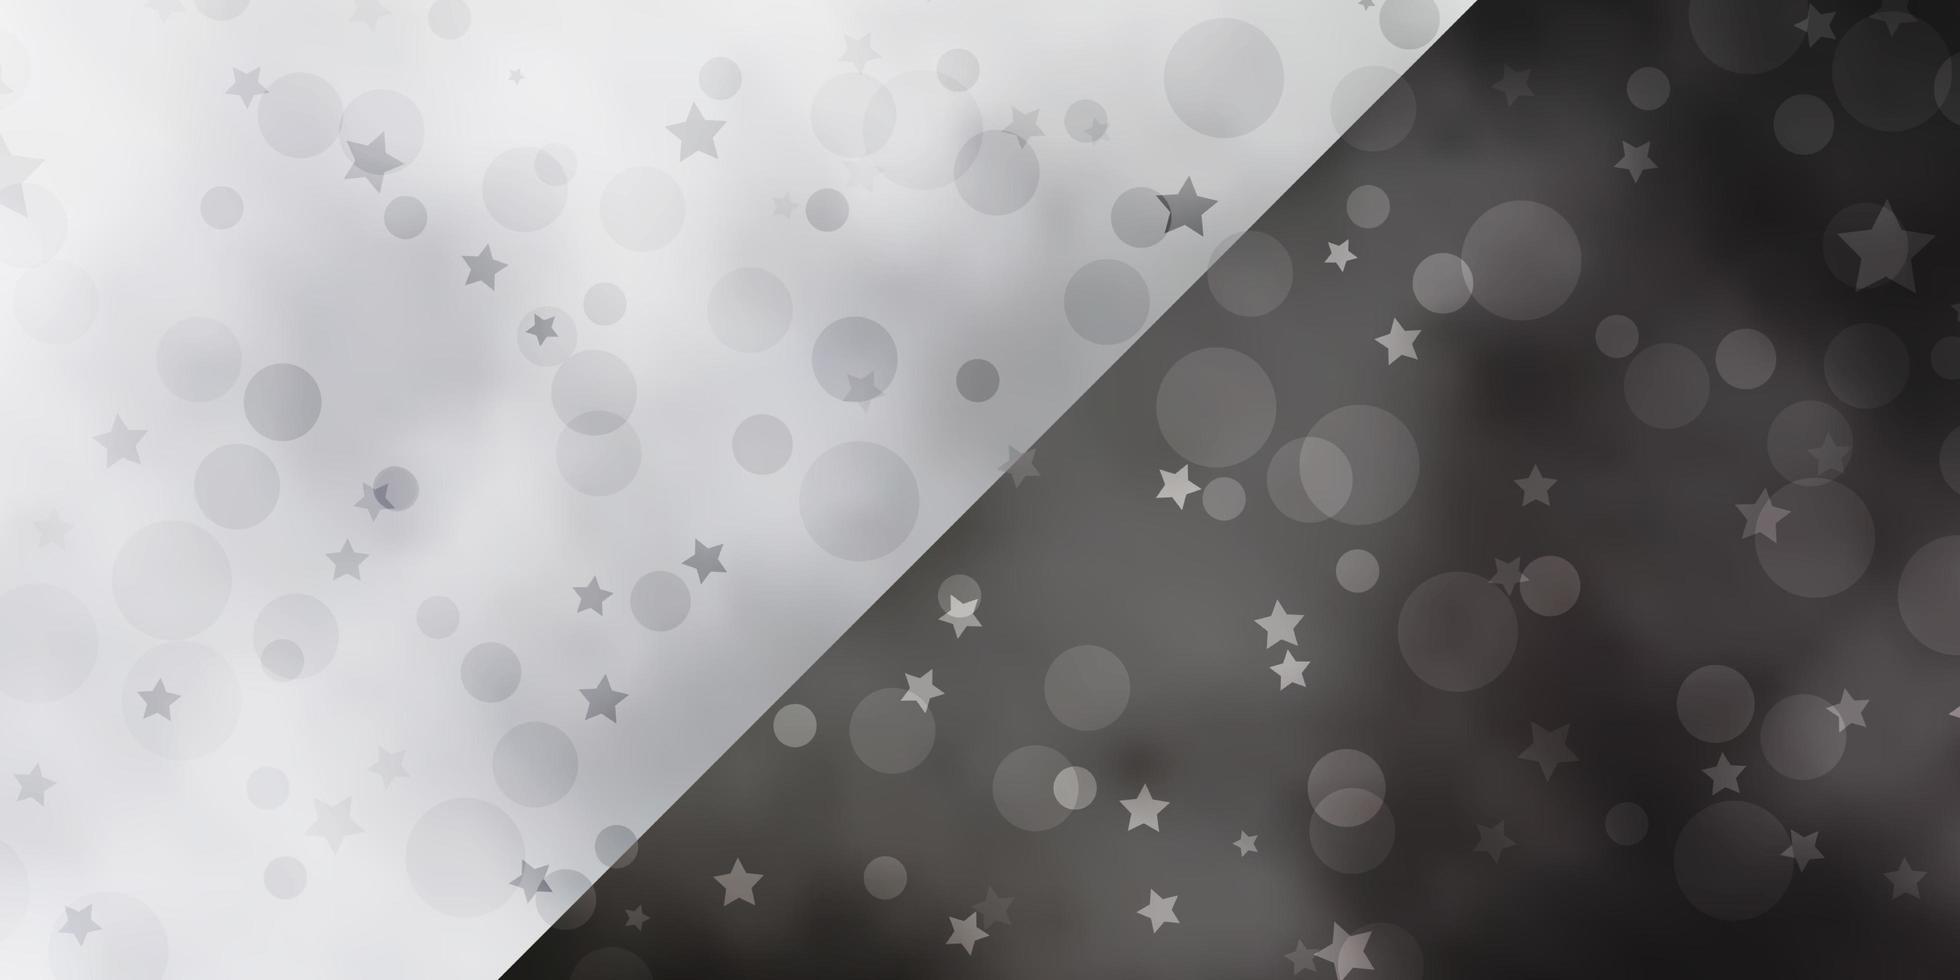 Vector background with circles, stars. Abstract design in gradient style with bubbles, stars. Design for textile, fabric, wallpapers.